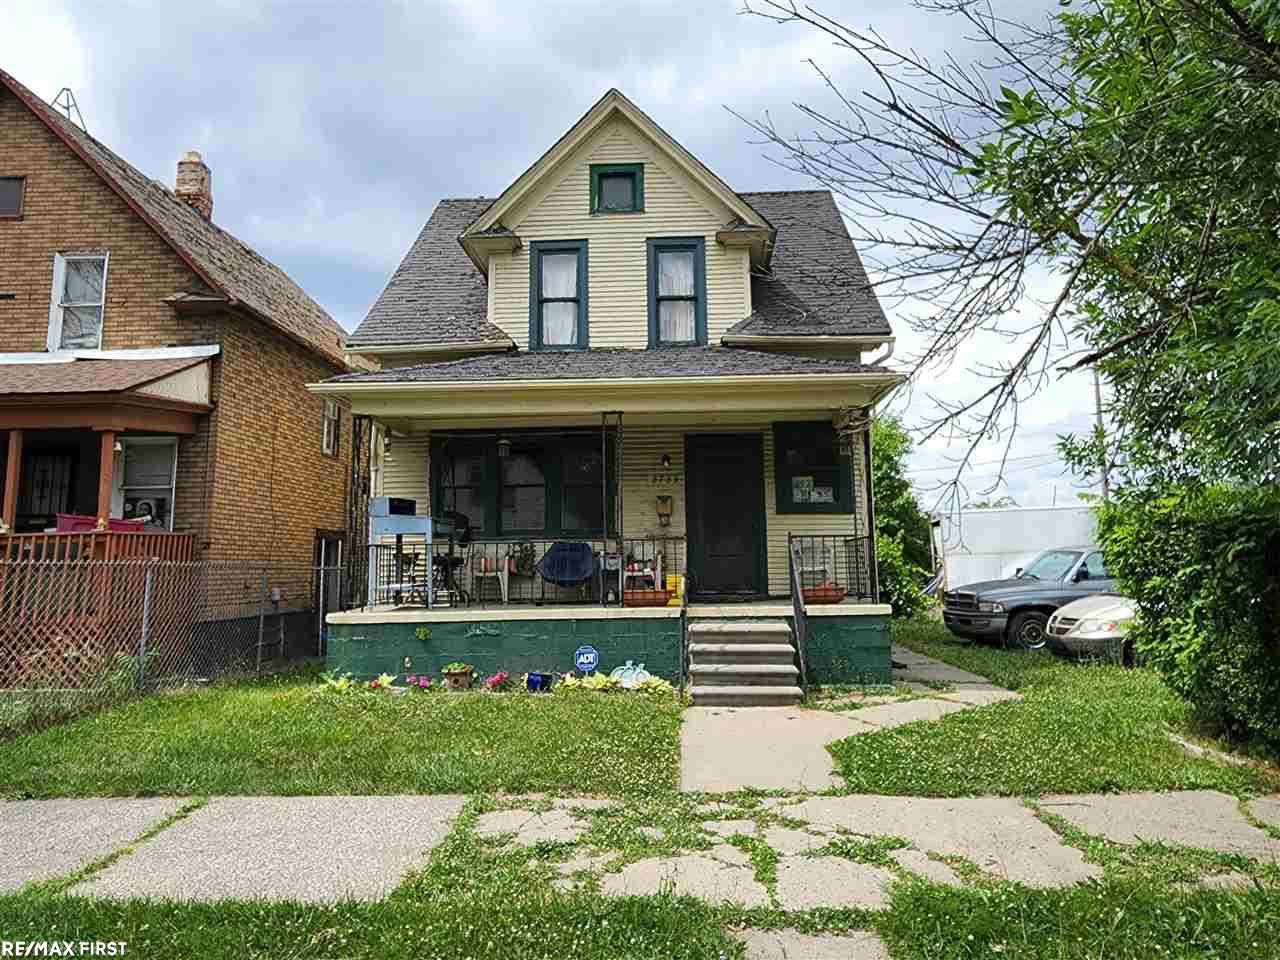 Hoarder Owned. No inside showings. Full of Hoarders' Collection. Will need many dumpsters to empty. Cash Only. Near Downtown and Hamtramck. Zoned Commercial, Possible Redevelopment!